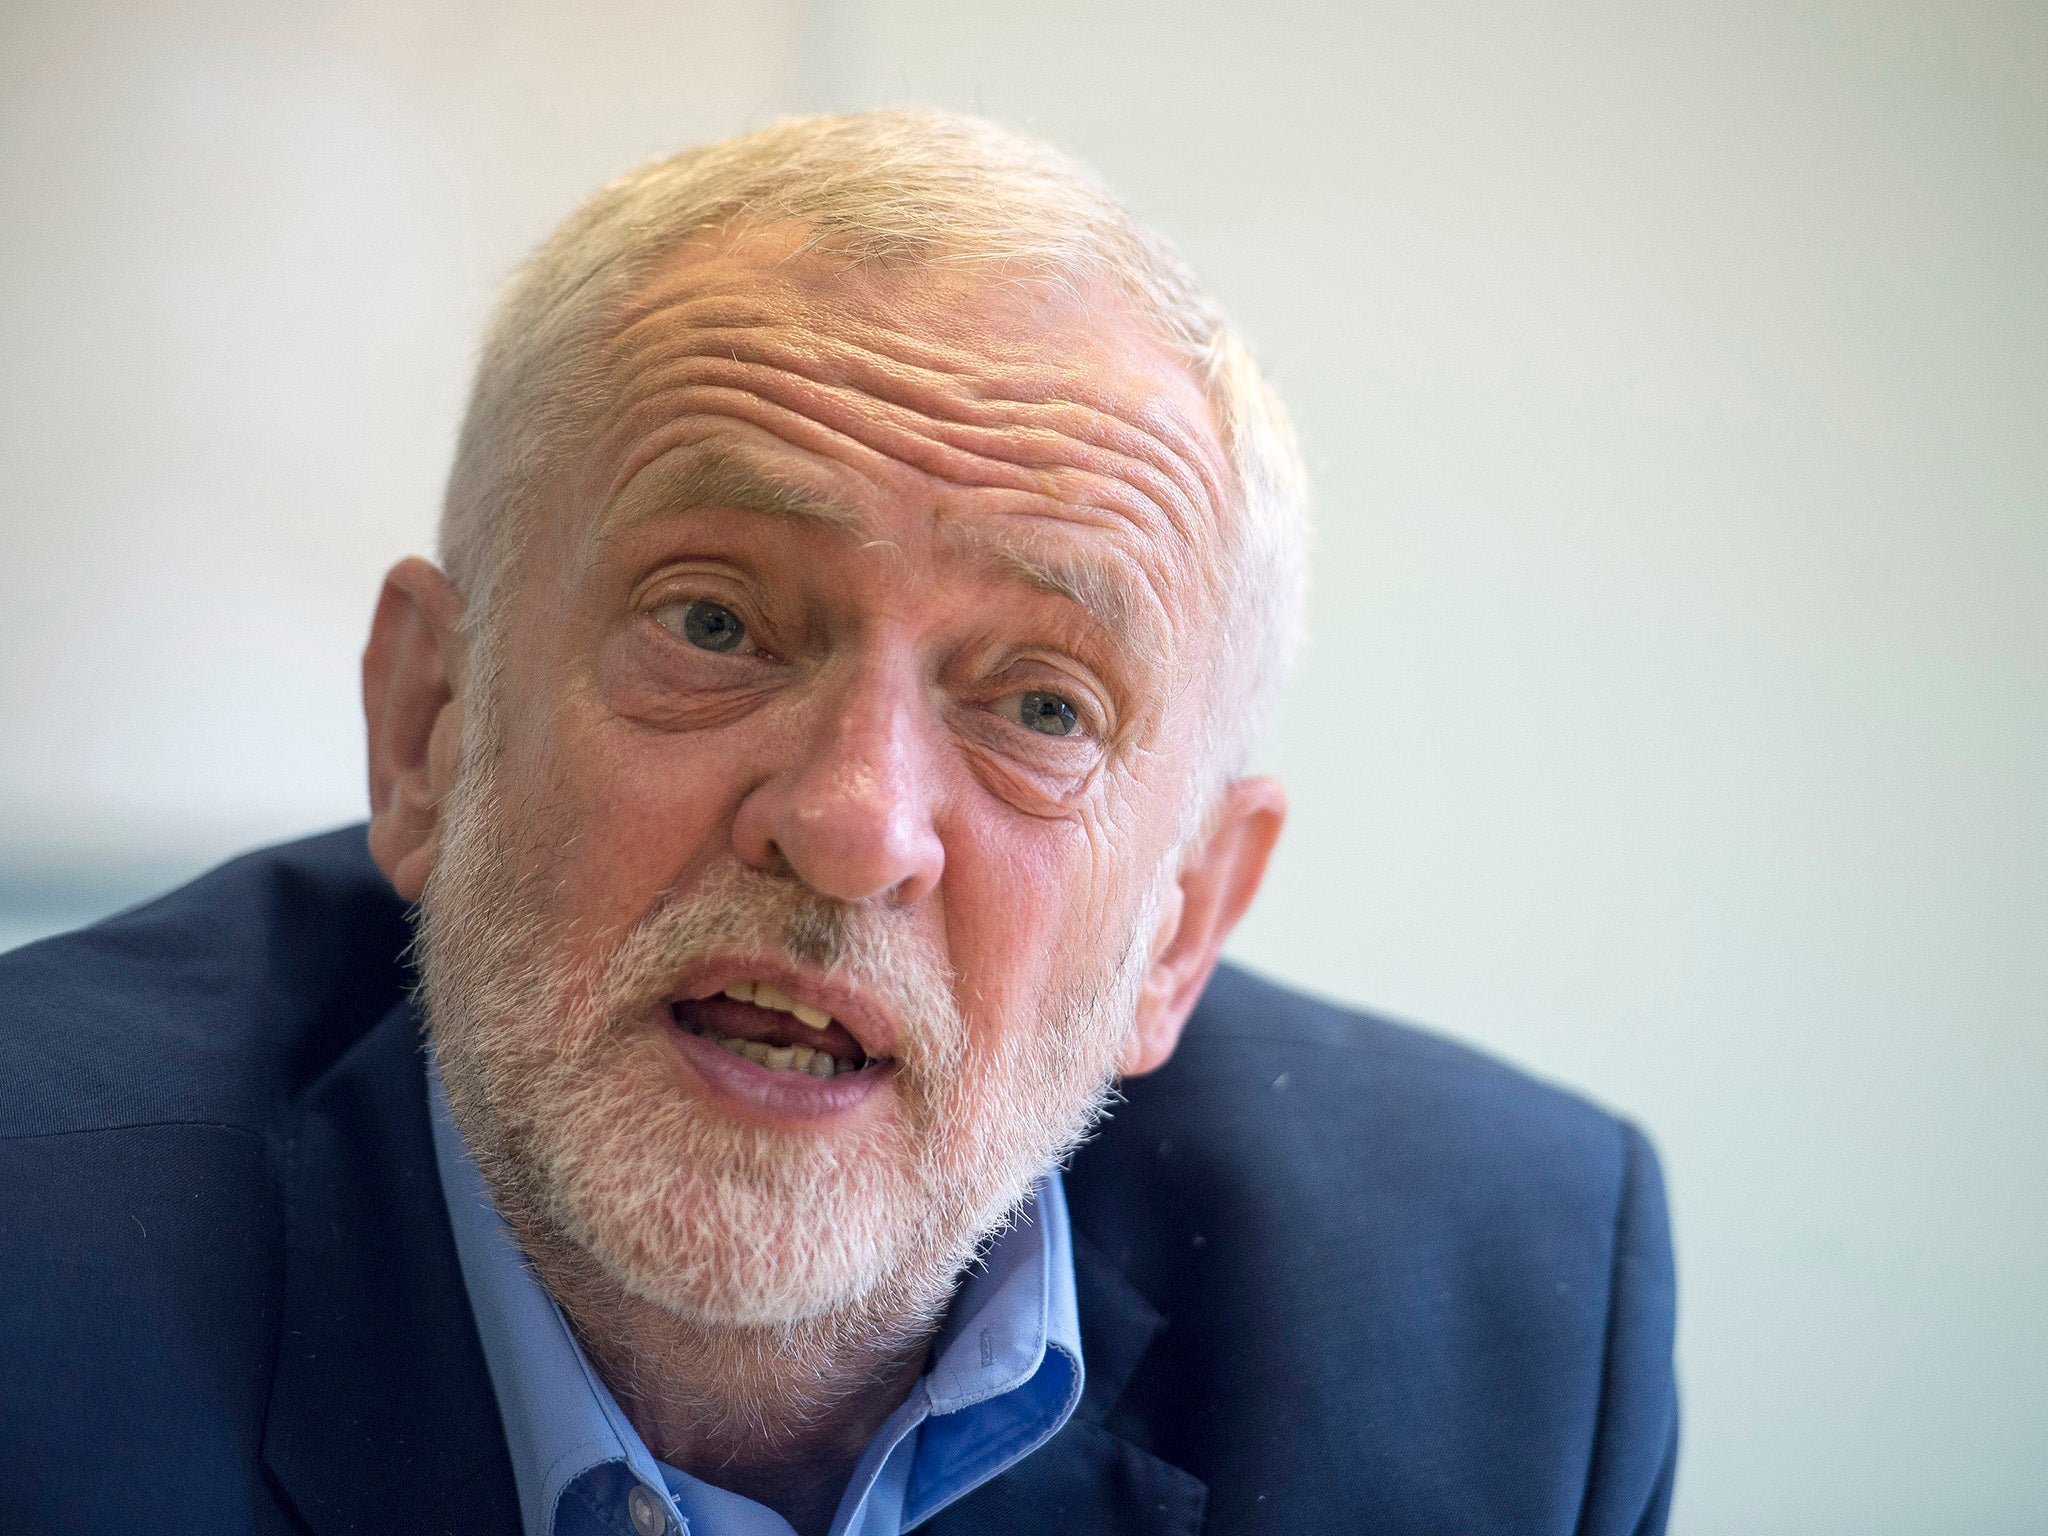 Jeremy Corbyn said Donald Trump 'should unequivocally condemn those who want to reverse the achievements of the civil rights movement'